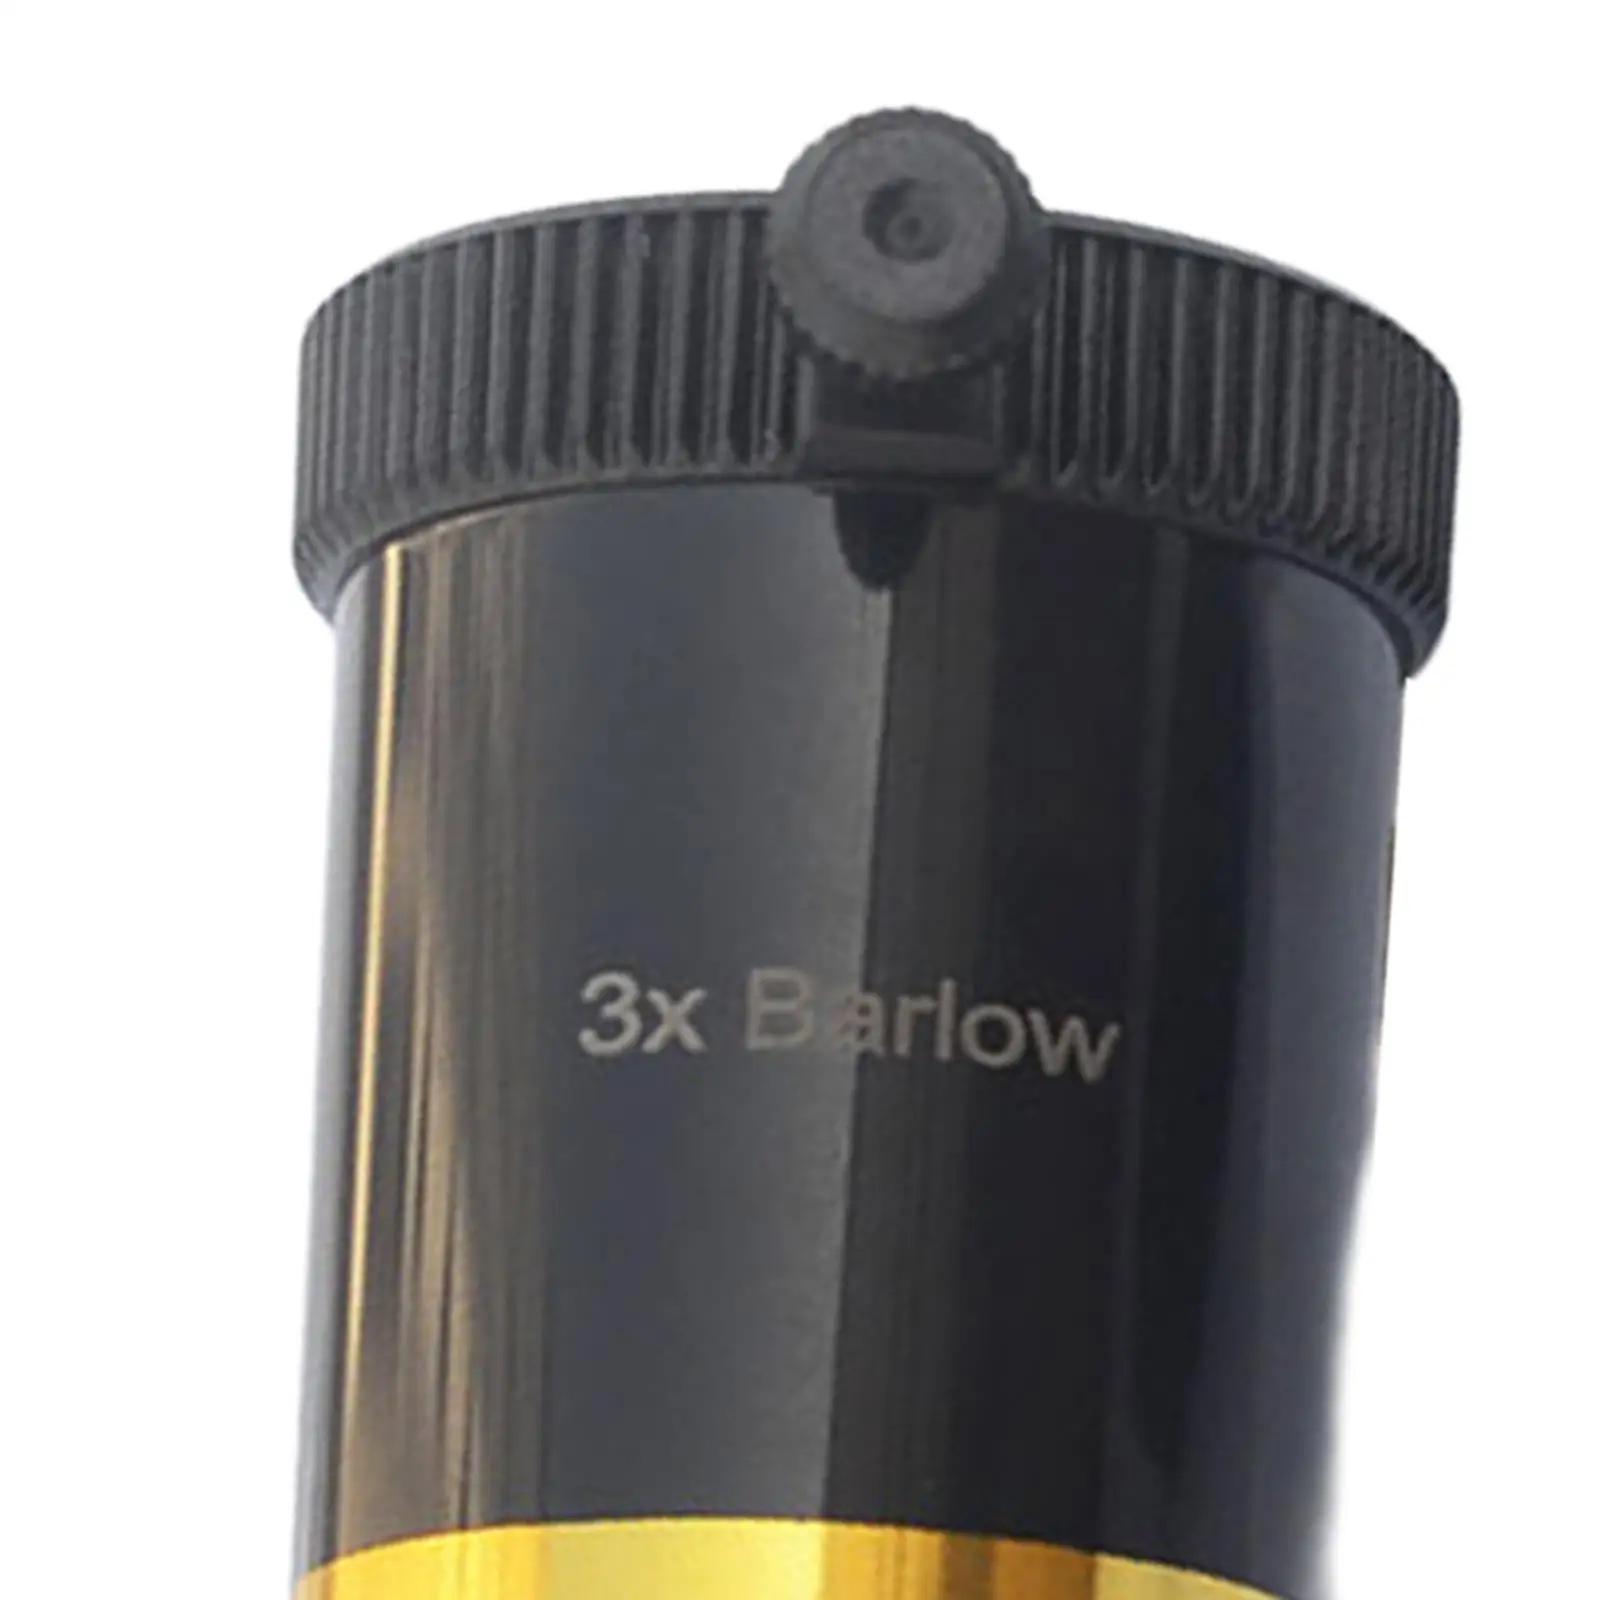 3x Barlow Lens Magnification Multi Coated Professional 1.25 inch Telescope